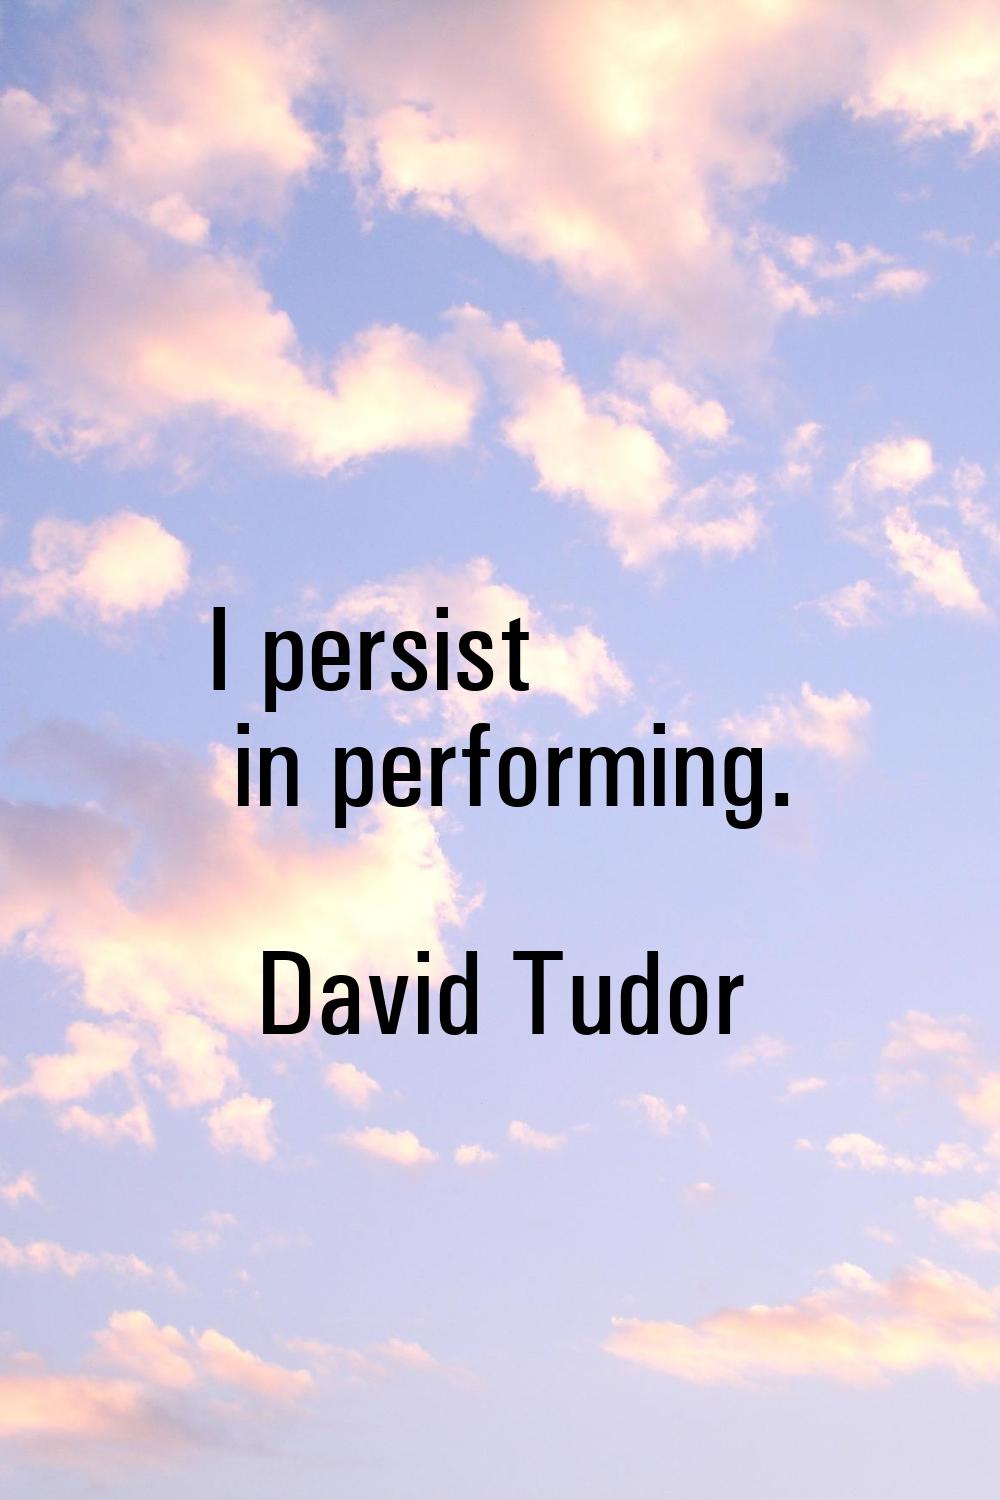 I persist in performing.